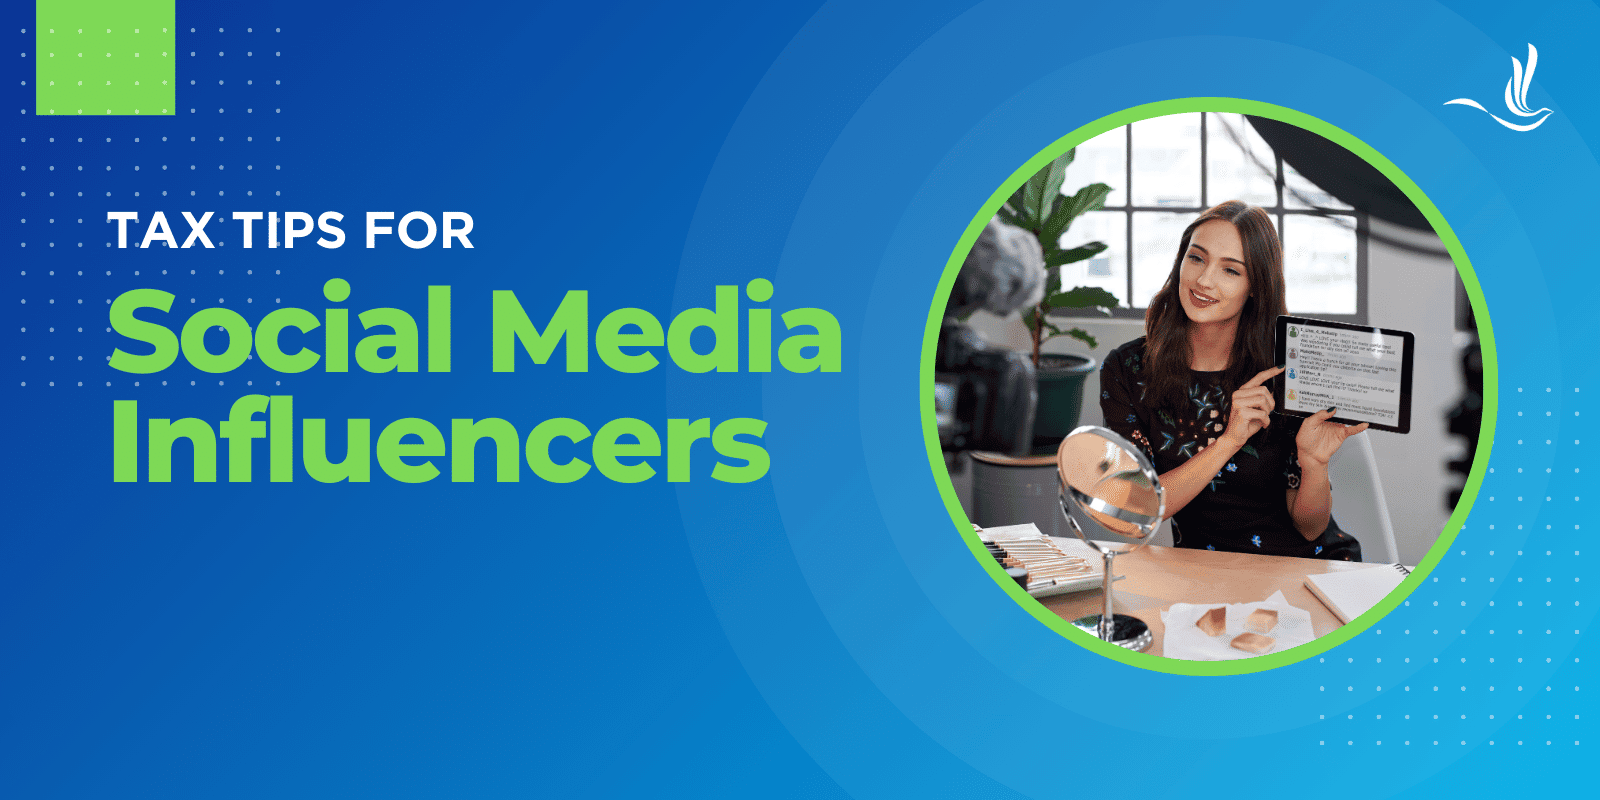 tax tips for social media influencers